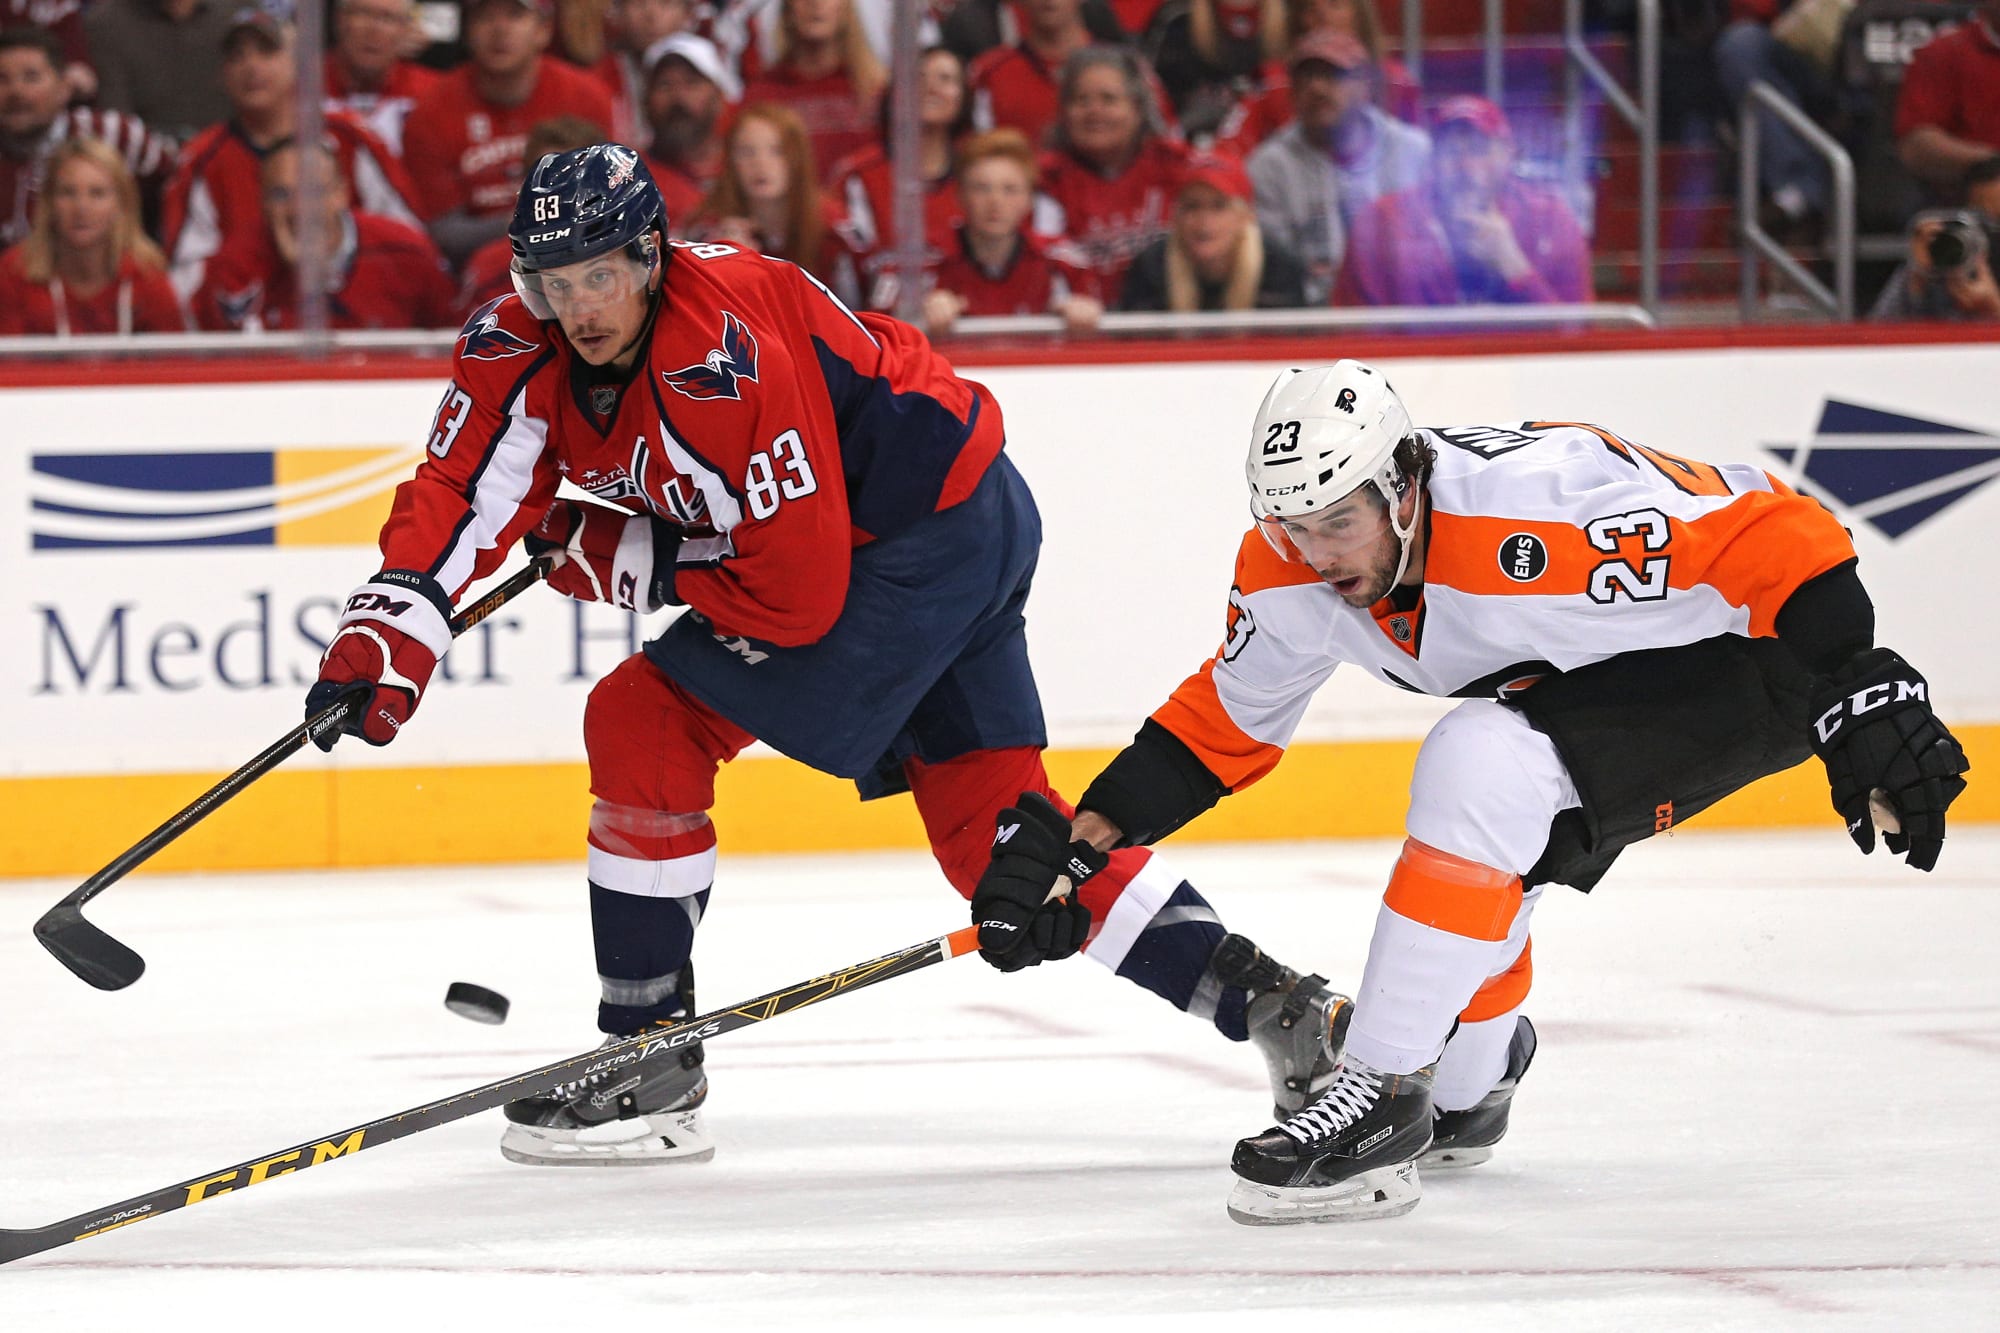 Flyers vs. Capitals Full highlights, final score and more